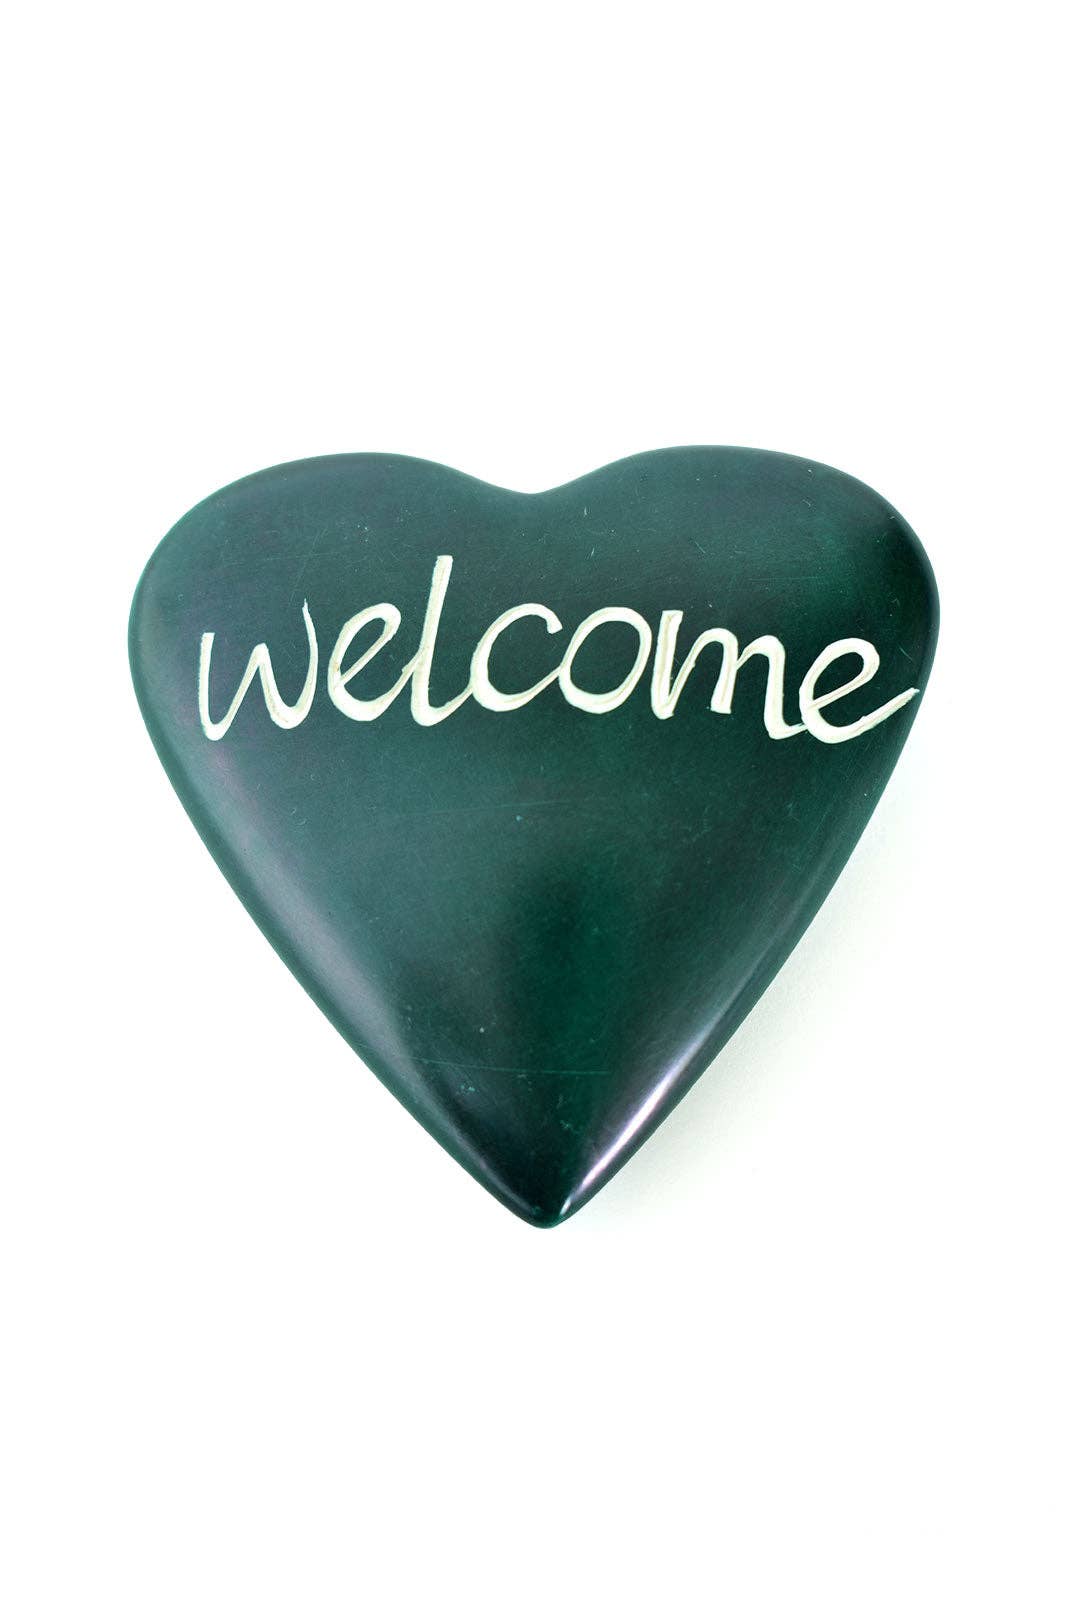 Wise Words Soapstone Heart:  Welcome